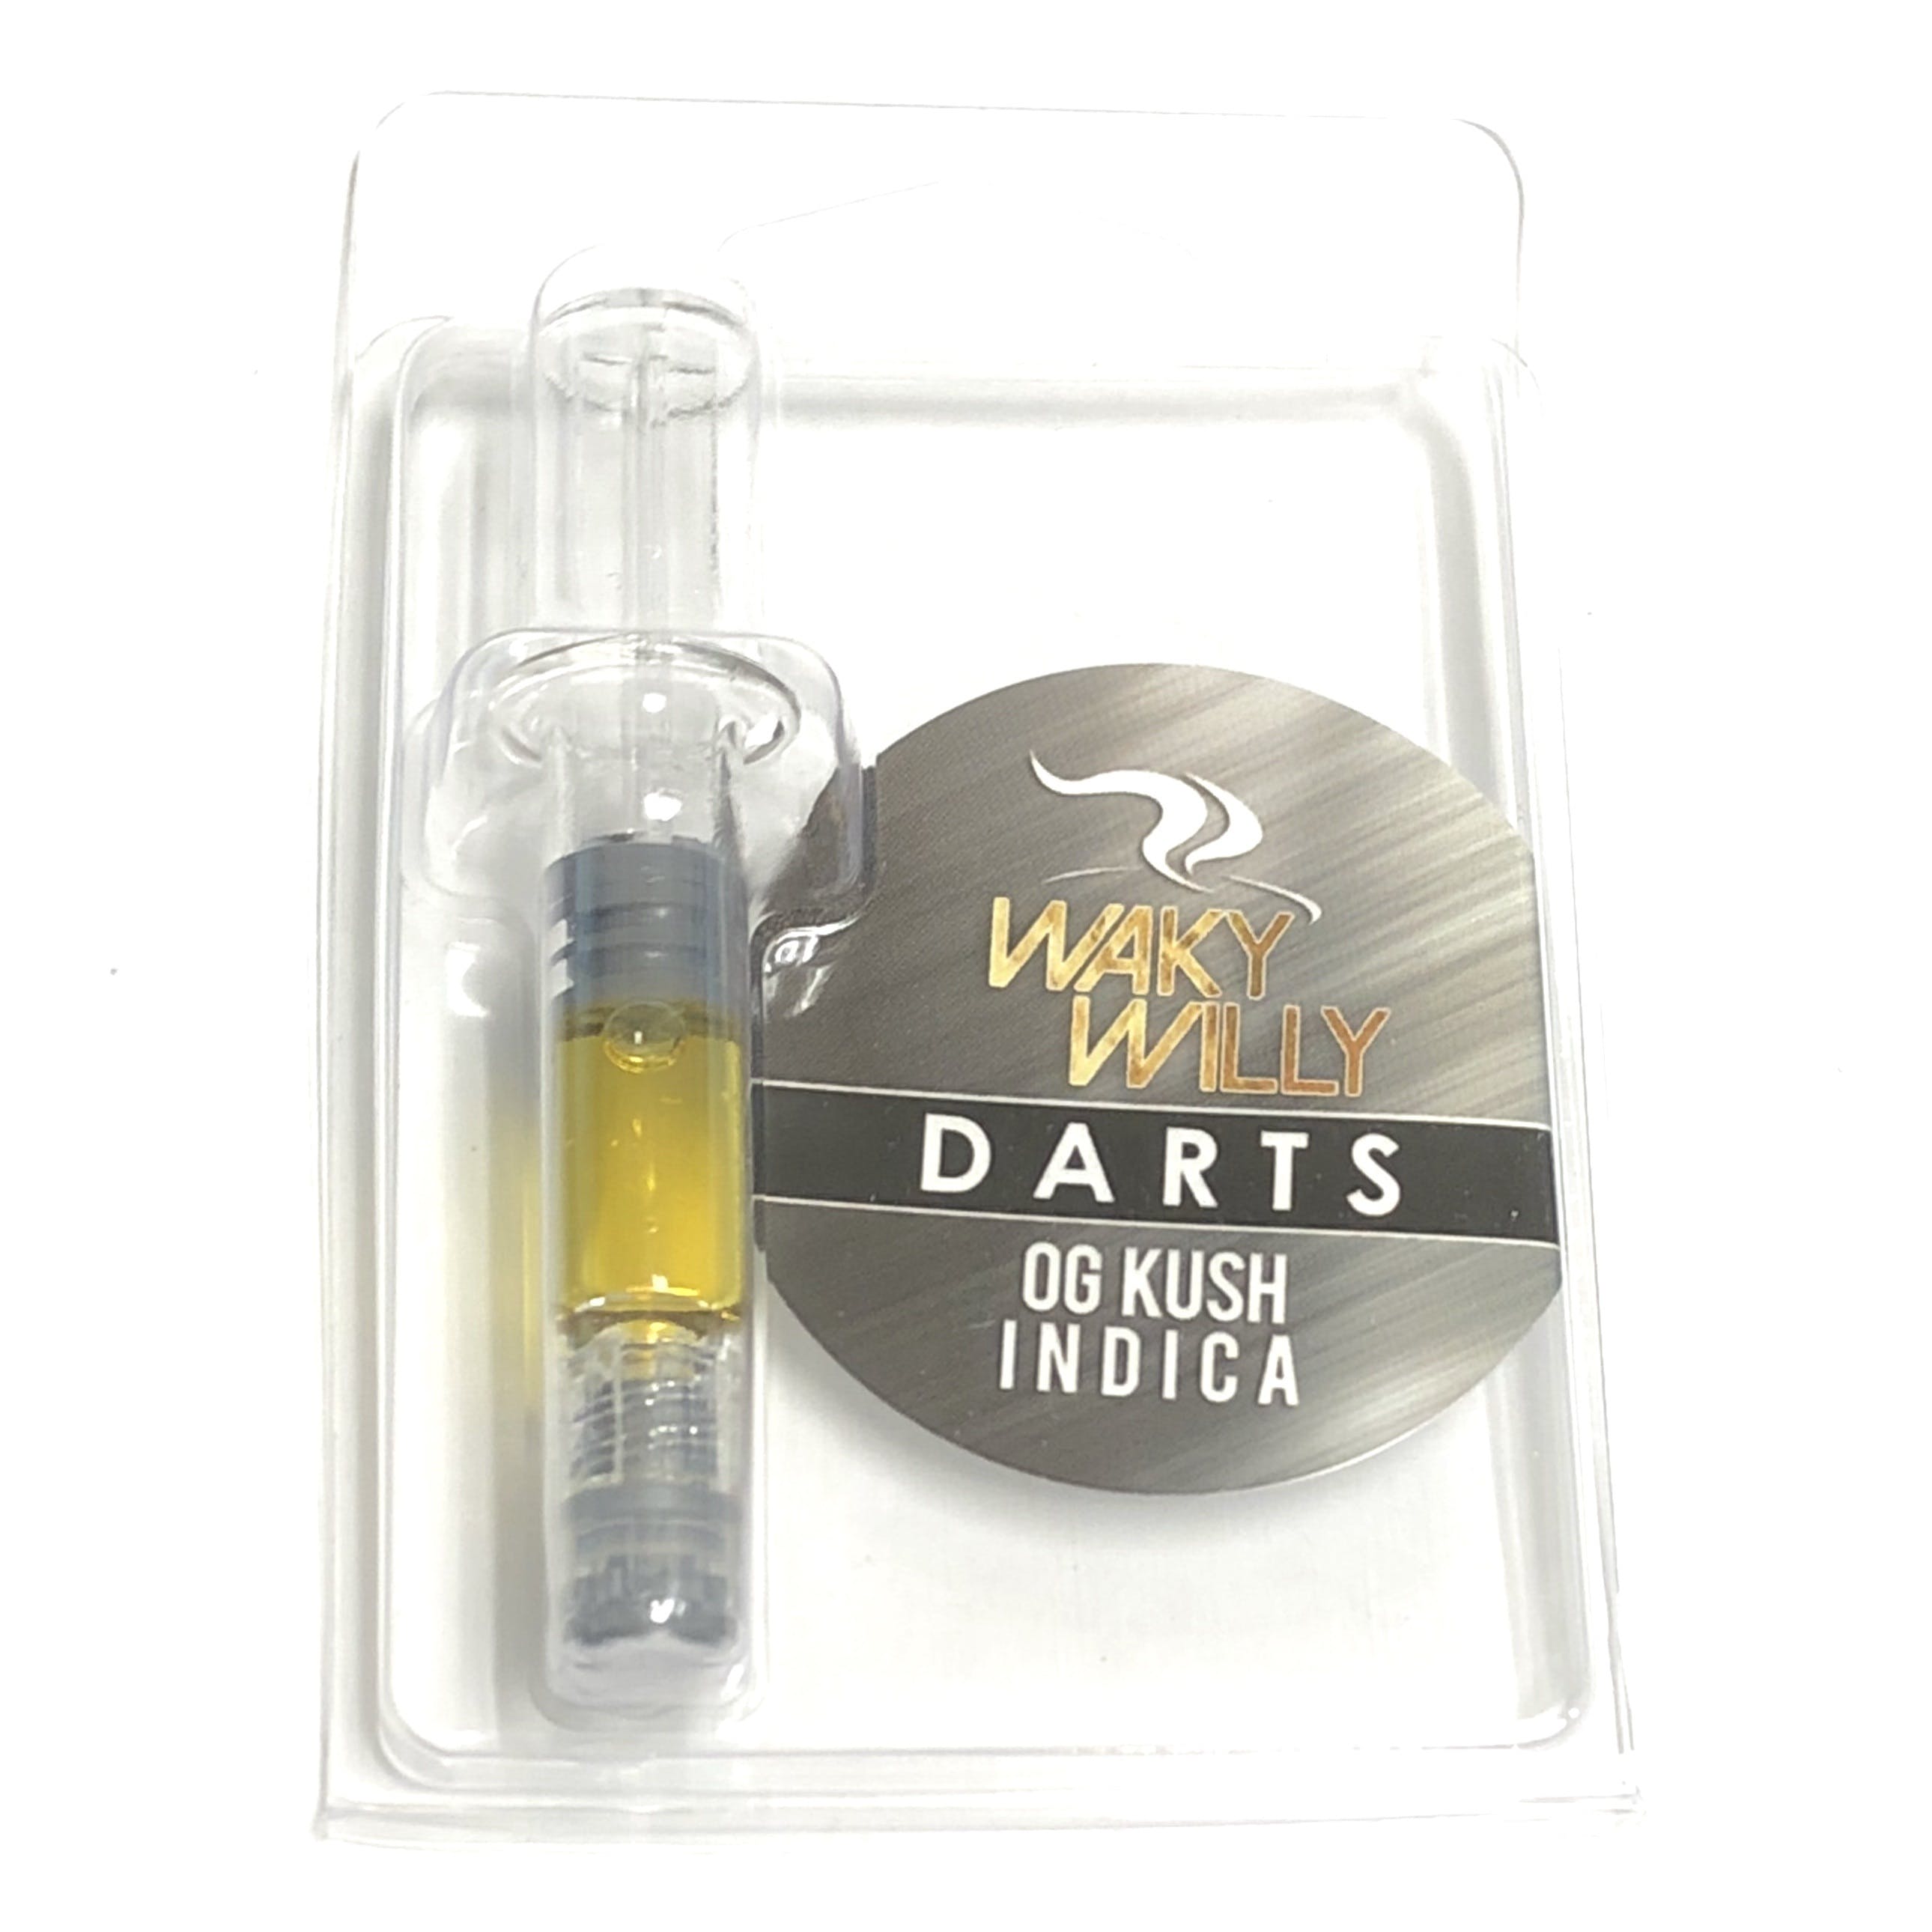 concentrate-waky-willy-distillate-darts-1g-3-2490